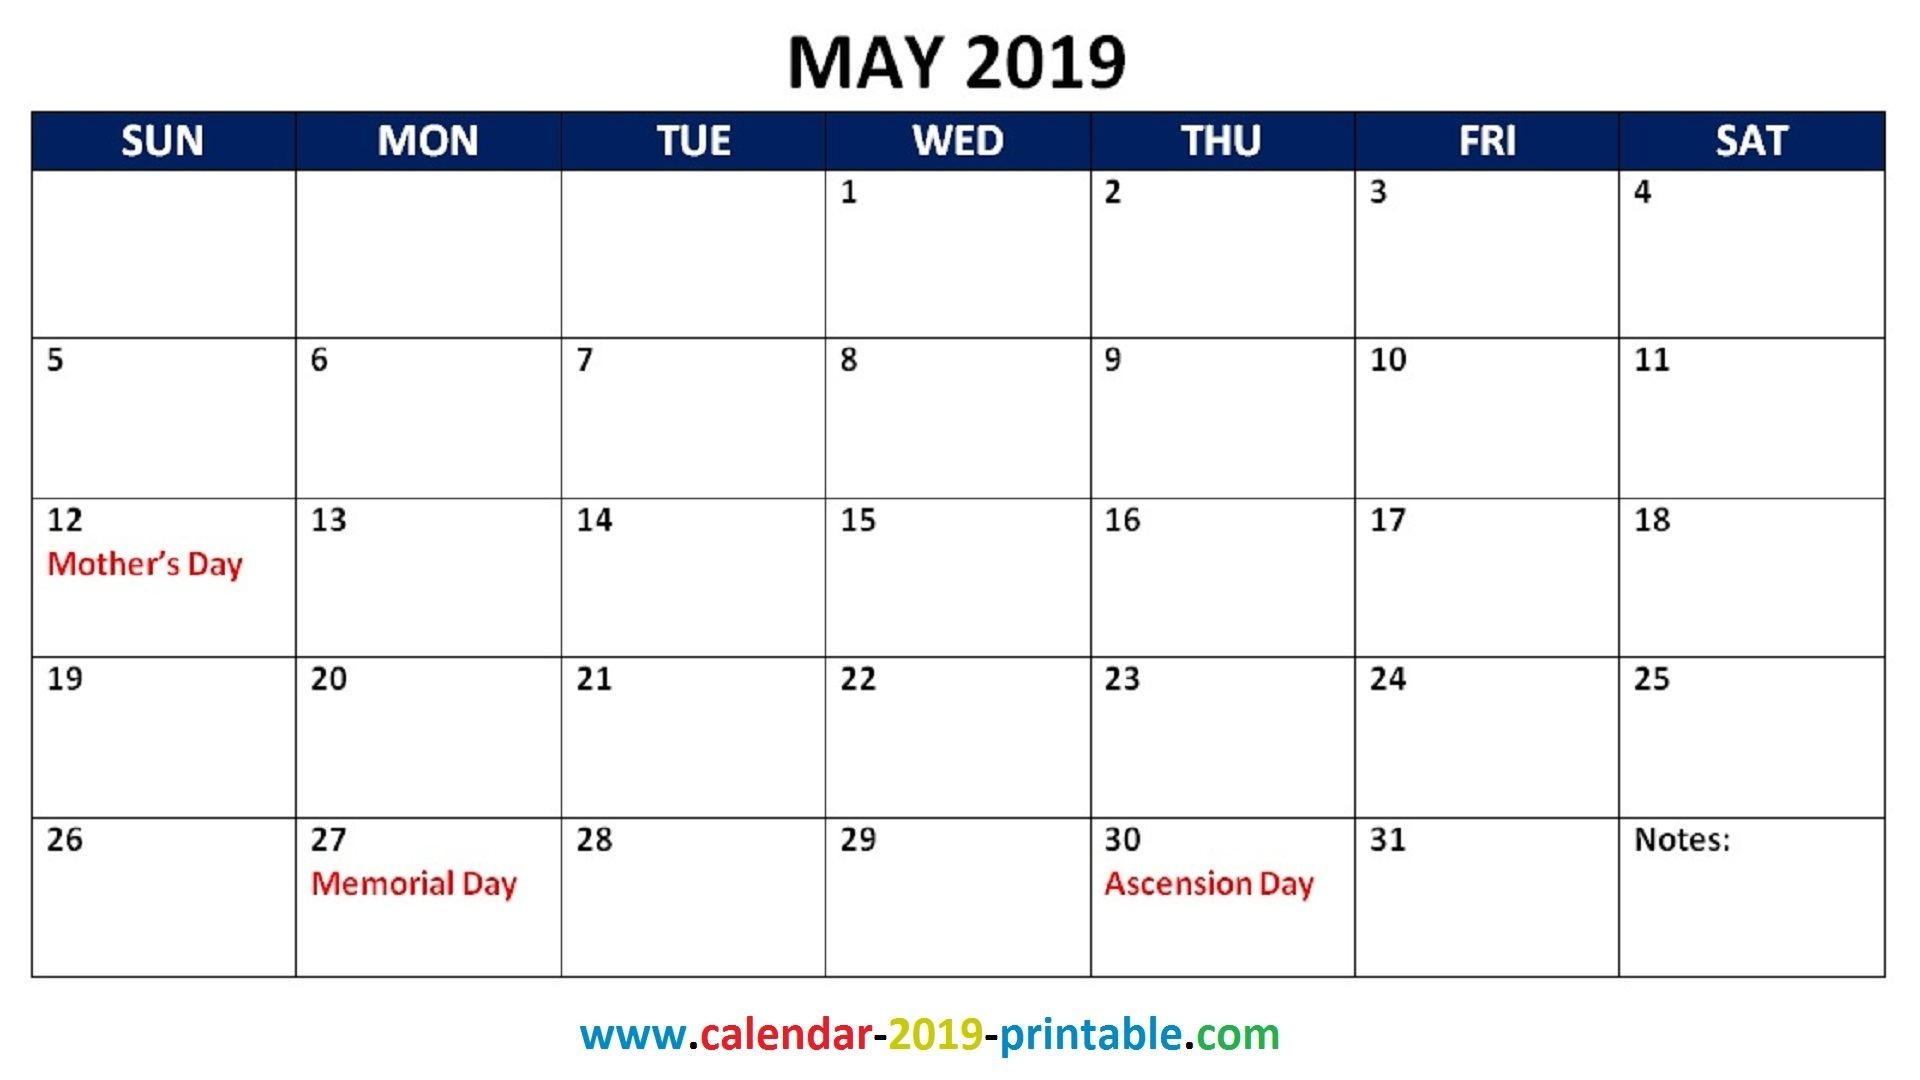 may-2019-calendar-with-holidays-qualads